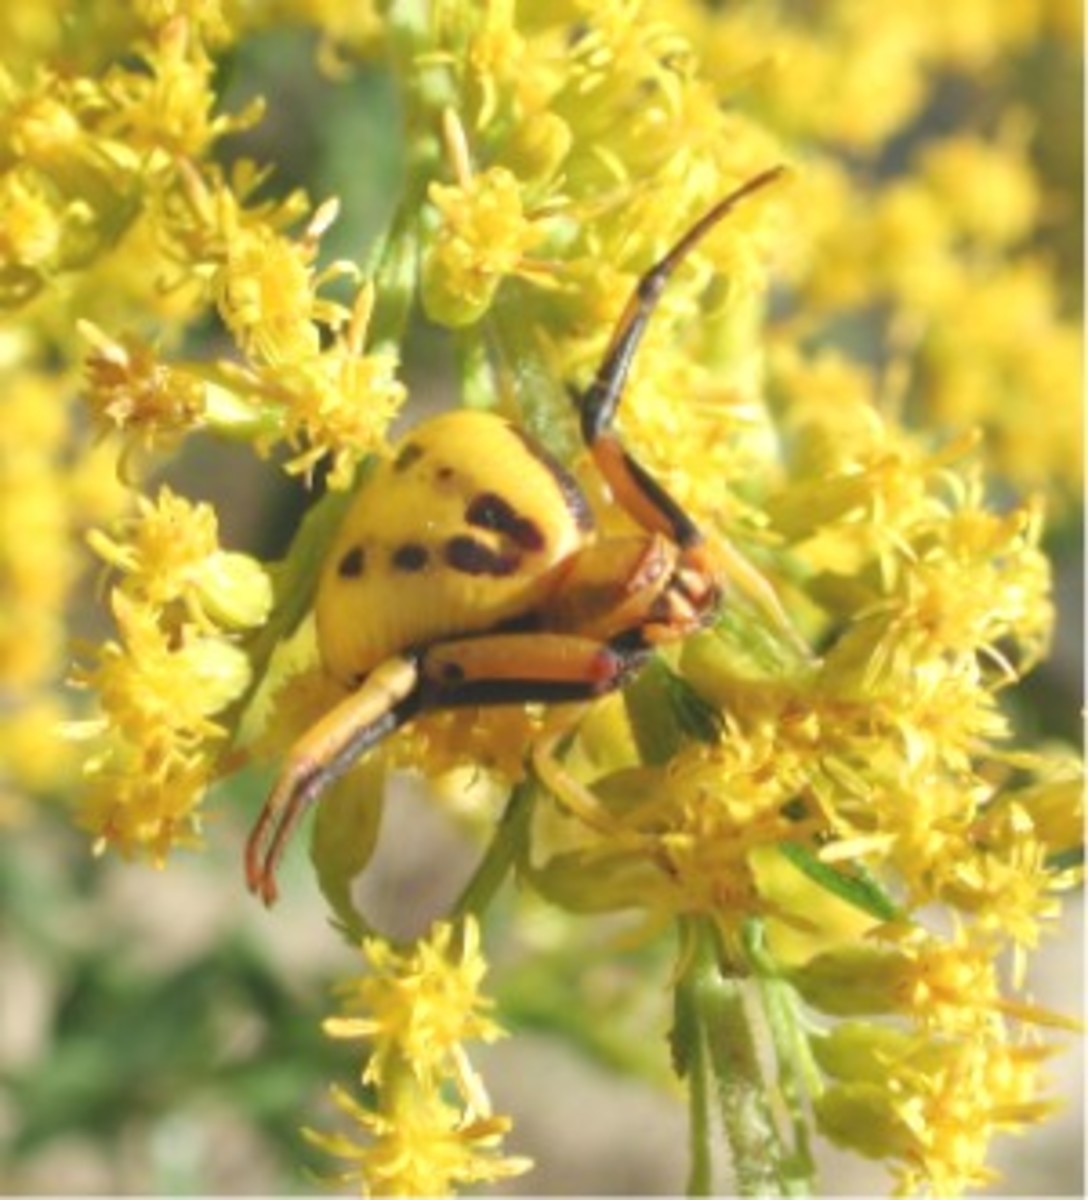 The goldenrod crab spider predominantly lives on goldenrod and milkwort. Clambering over the flowers distributes the pollen and they also eat the pollen as high energy food.